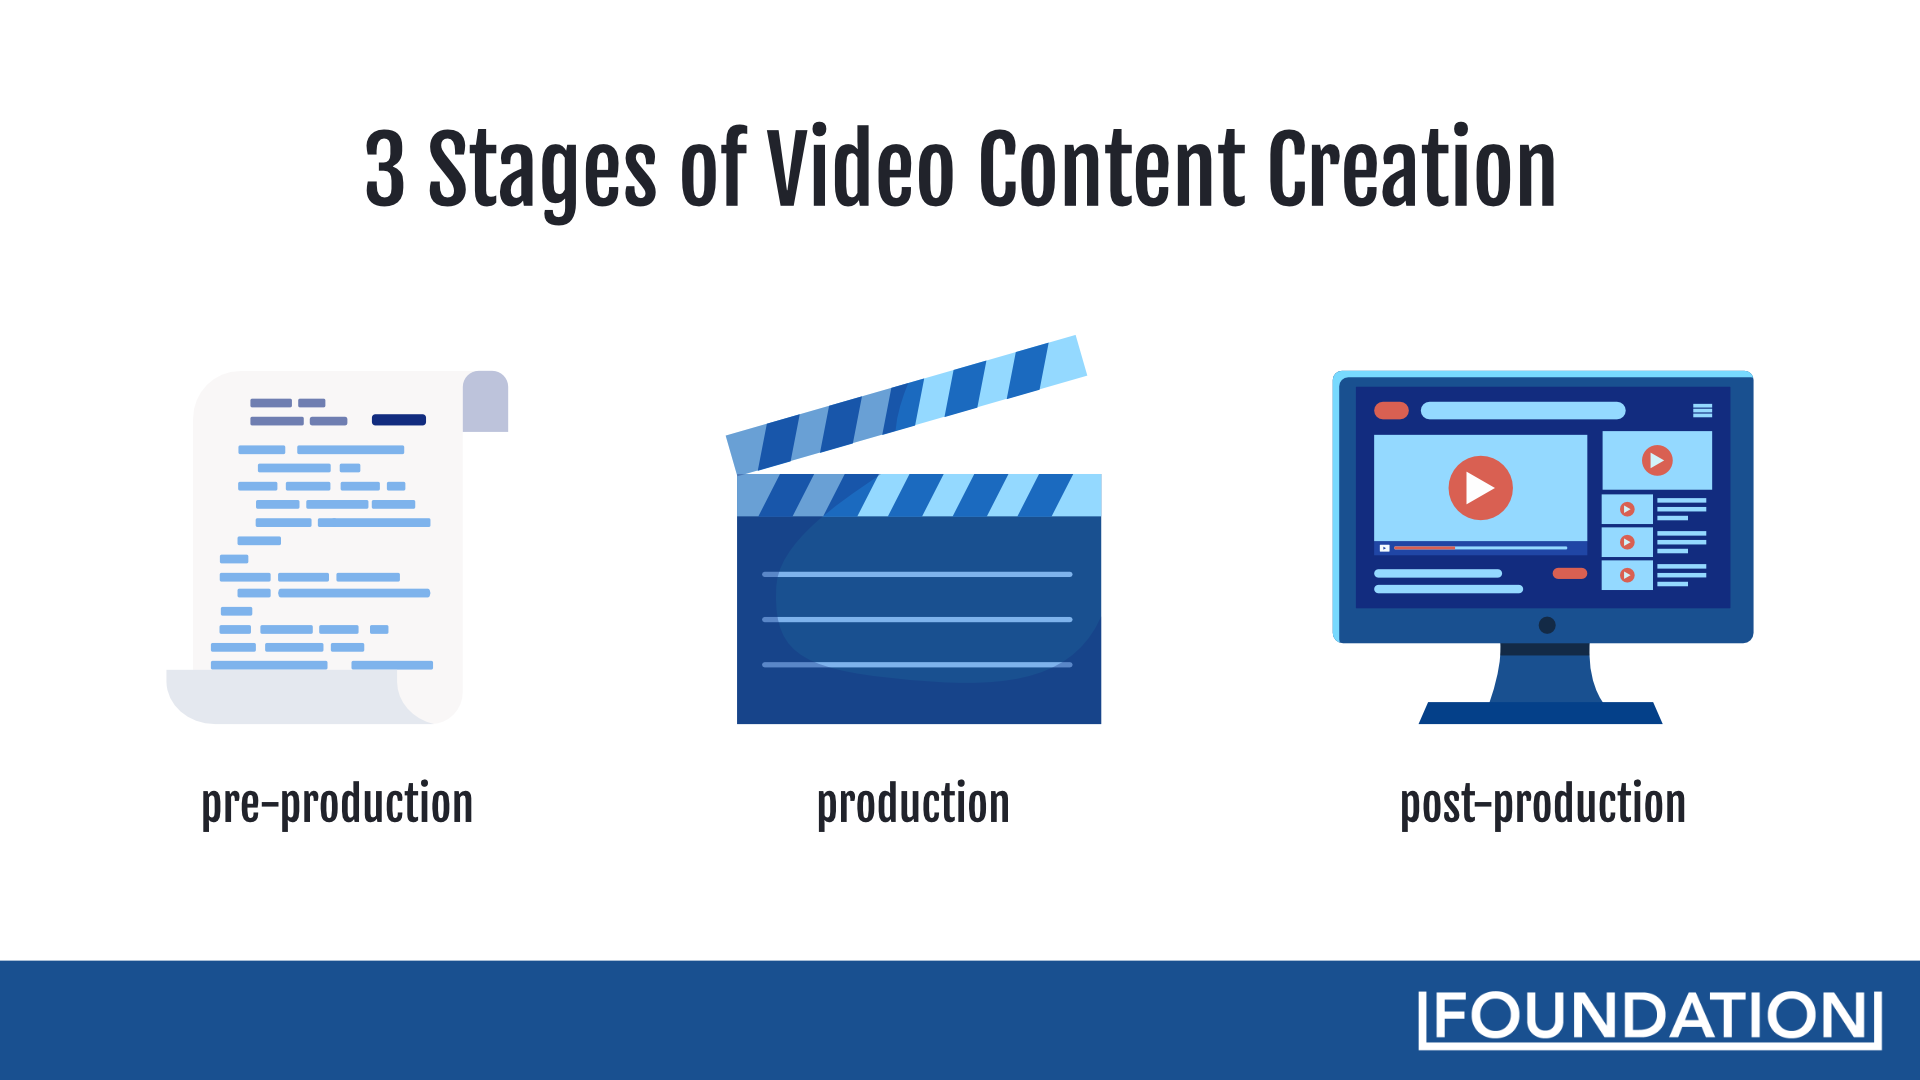 The 3 stages of video content creation are pre-production, production, and post-production